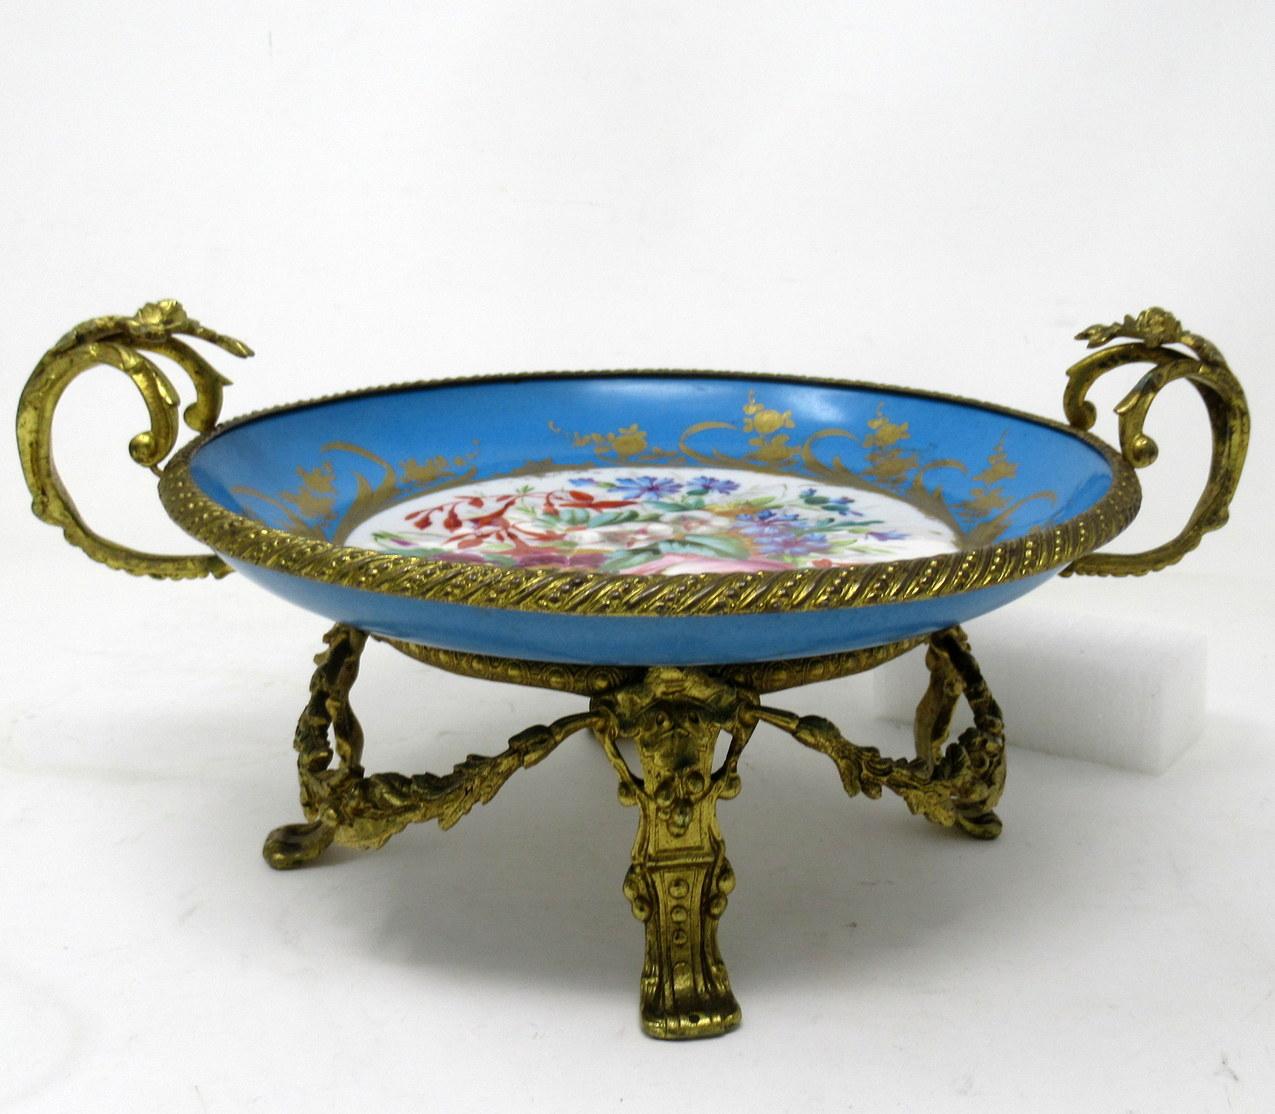 Antique French Sevres Ormolu Gilt Bronze Dore Porcelain Tazza Cabinet Plate Dish For Sale 2